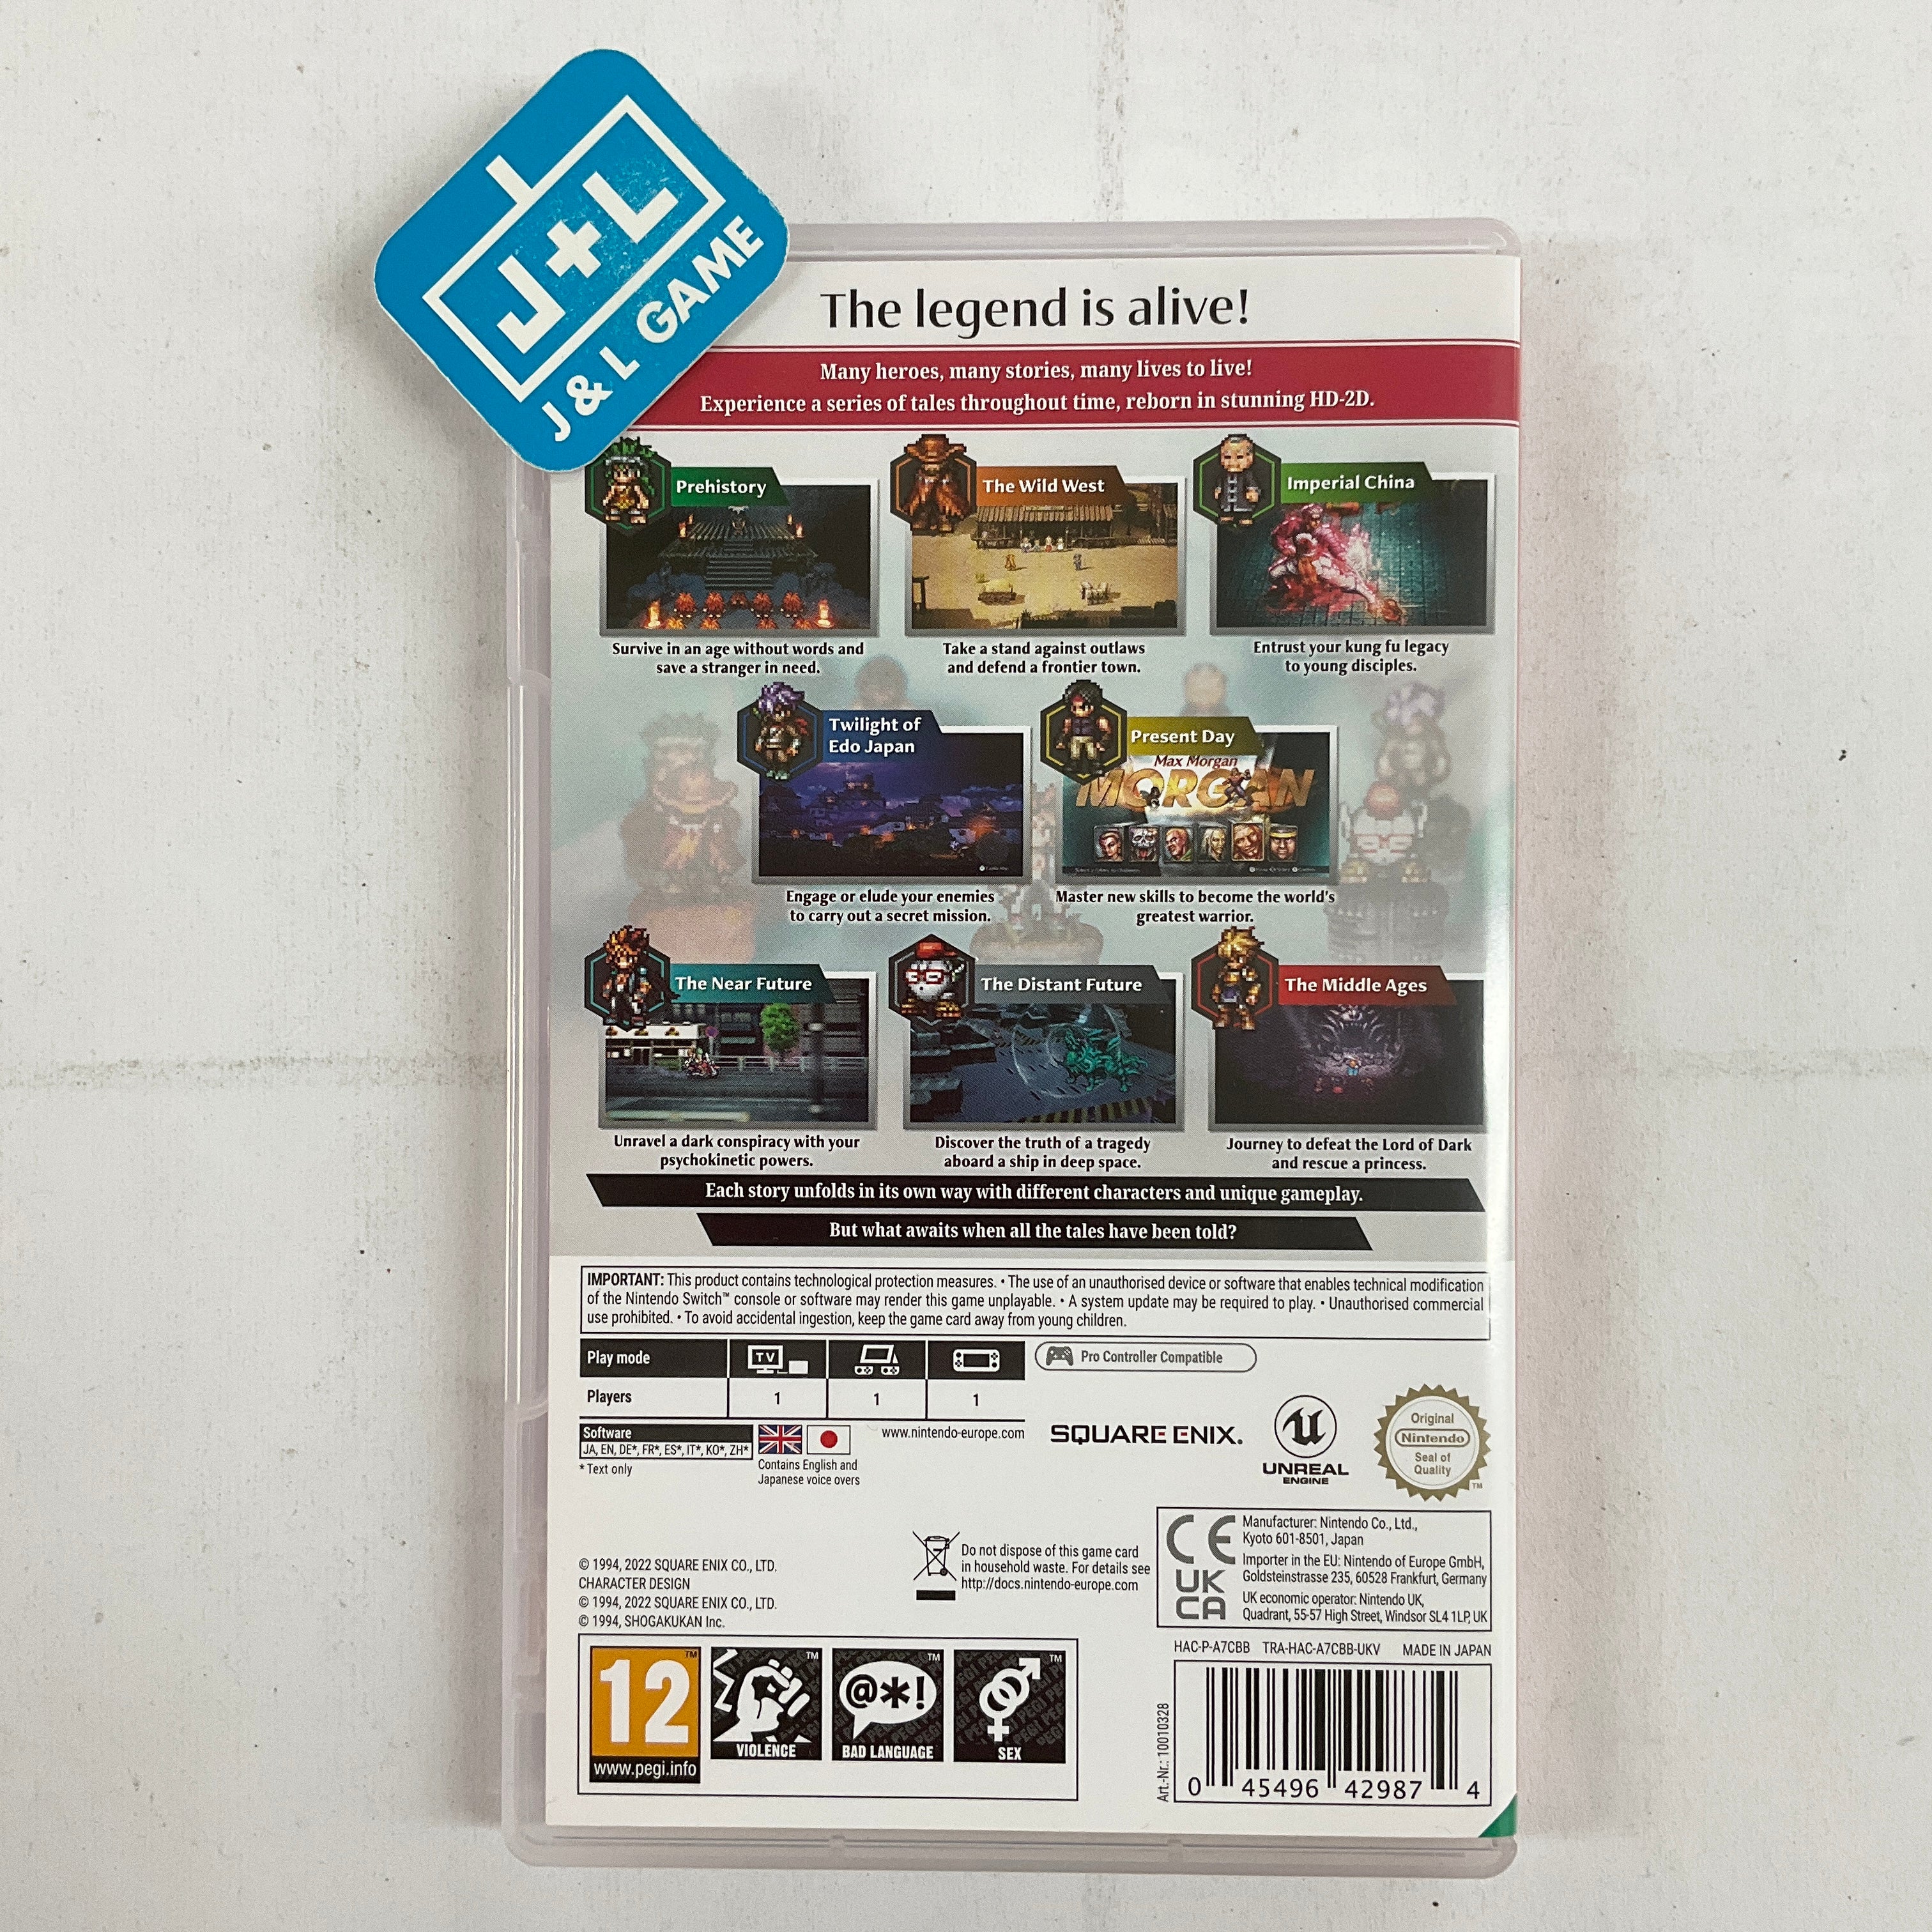 LIVE A LIVE - (NSW) Nintendo Switch [Pre-Owned] (European Import) Video Games Square Enix   